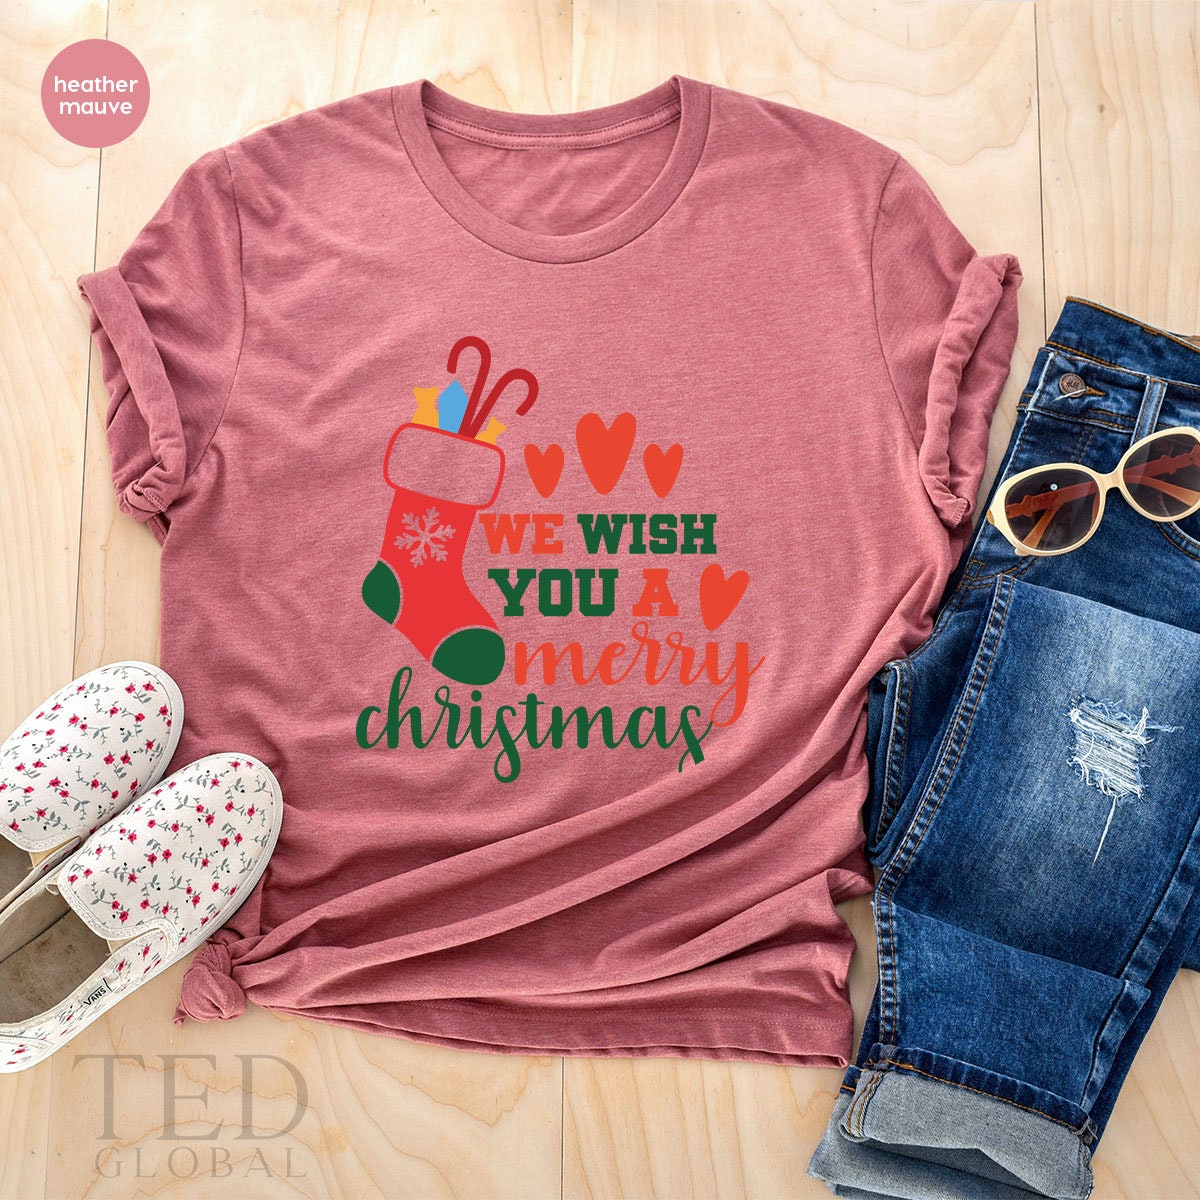 Cute Socks And Candy T-Shirt, We Wish You A Merry Christmas T Shirt, Funny Family Christmas Shirts, Holiday Outfit Shirt, Christmas Gift - Fastdeliverytees.com